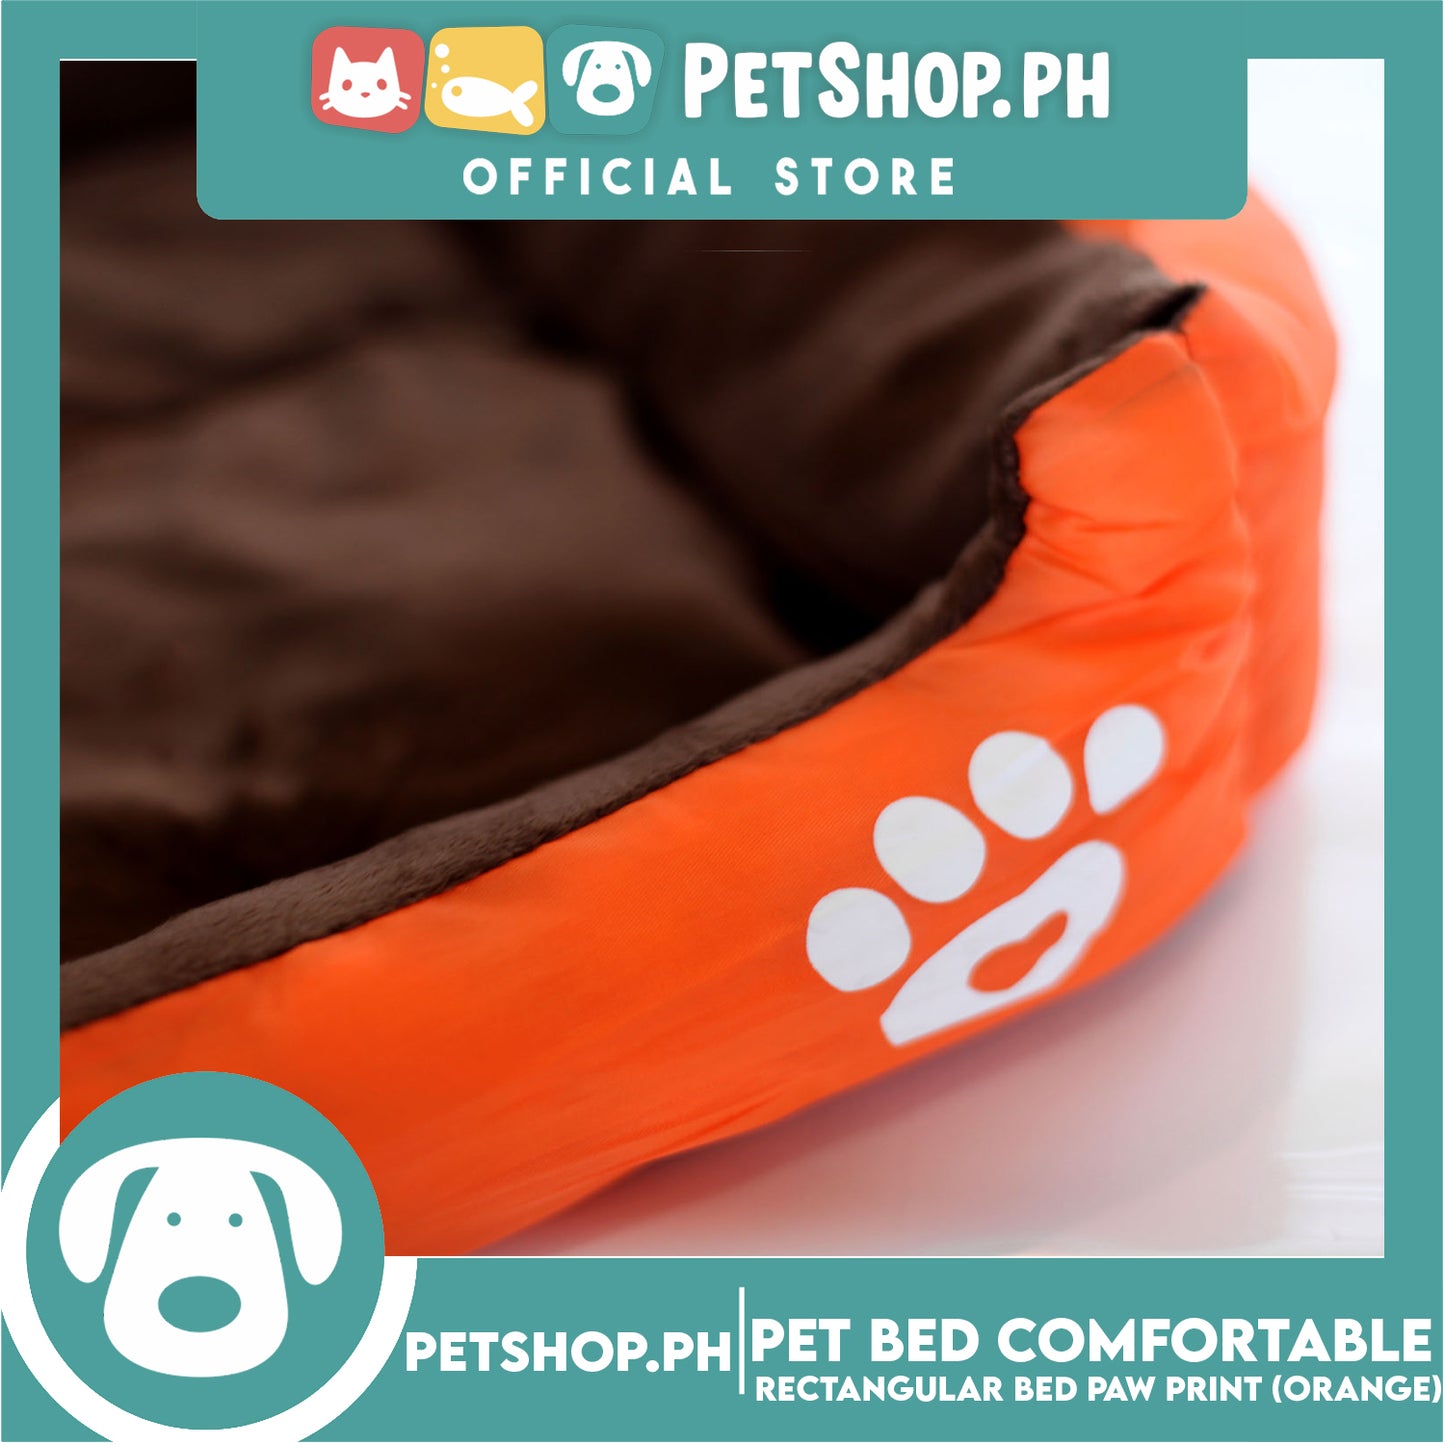 Pet Bed Comfortable Rectangular Pet Bed with Paw Print 50x40x12cm Small for Dogs & Cats (Orange)